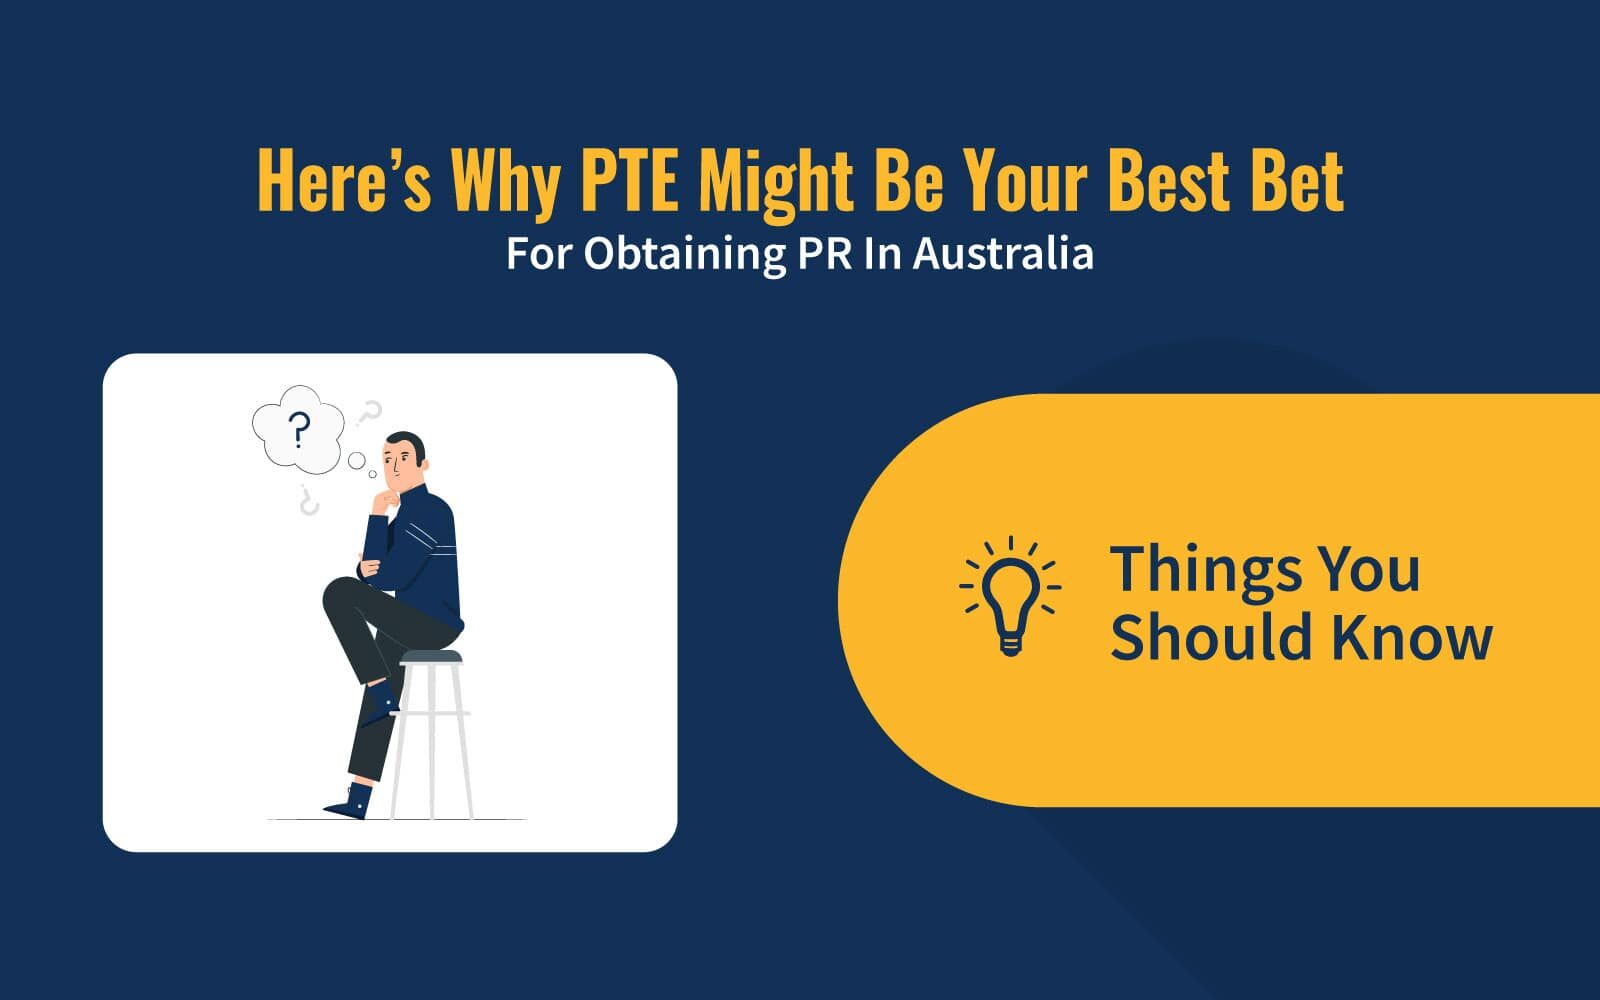 Here’s Why PTE Might Be Your Best Bet For Obtaining PR In Australia image